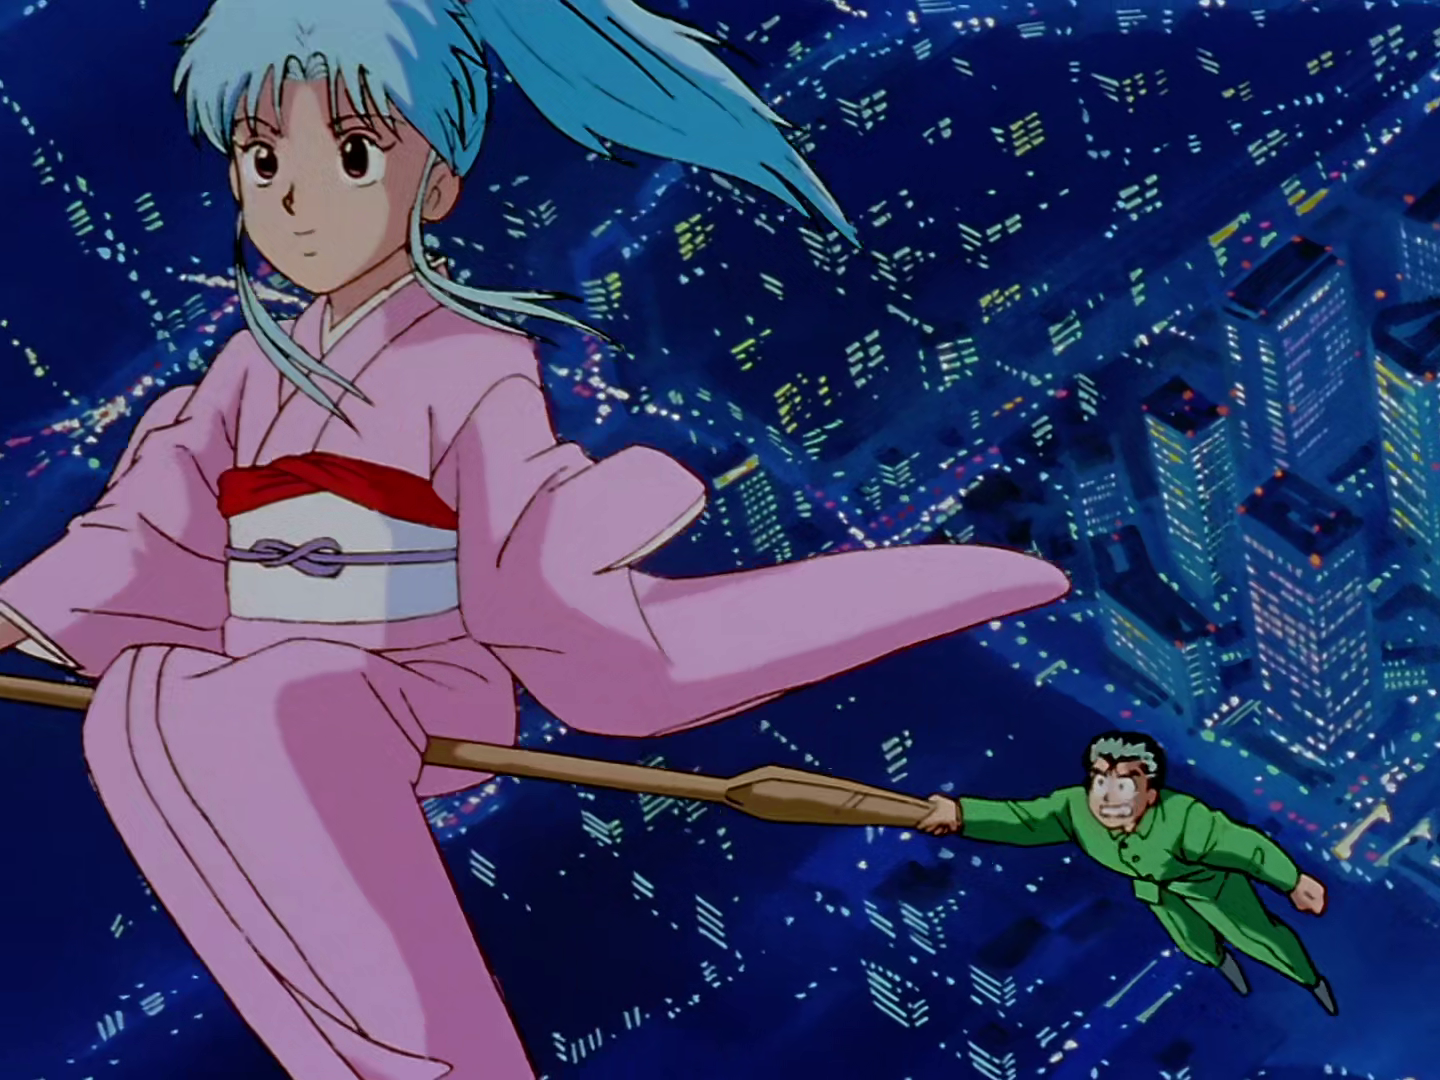 my favorite] botan fits from the spirit detective